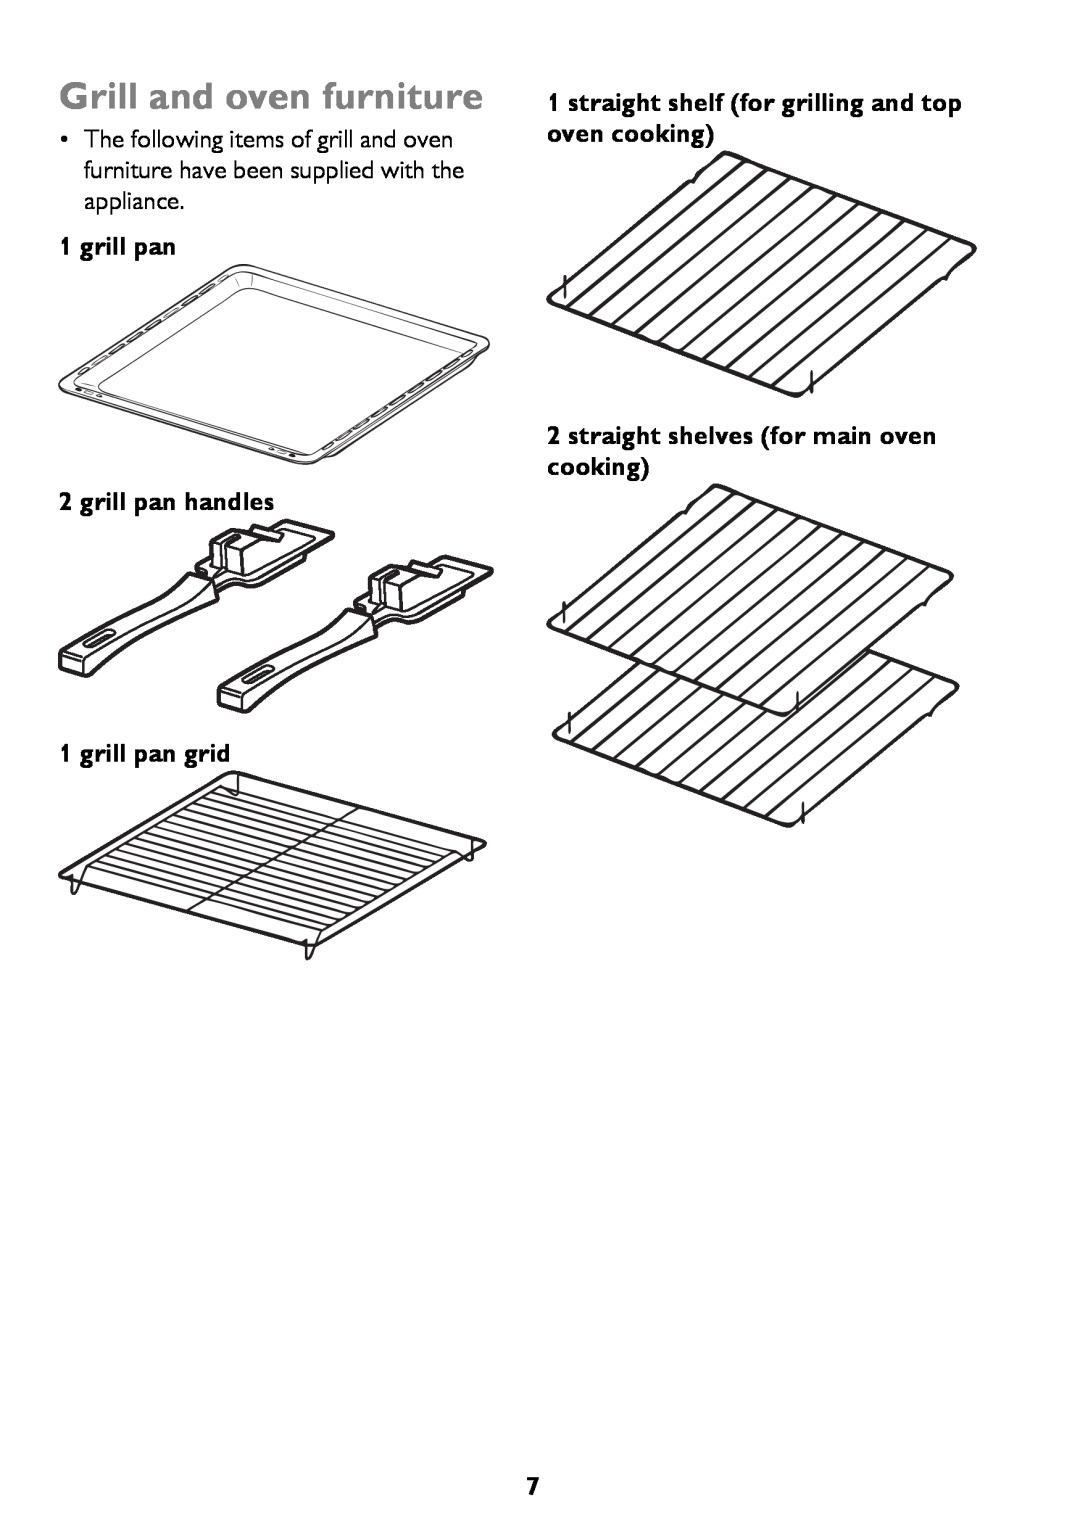 John Lewis JLBIDO911 instruction manual Grill and oven furniture, grill pan 2 grill pan handles 1 grill pan grid 